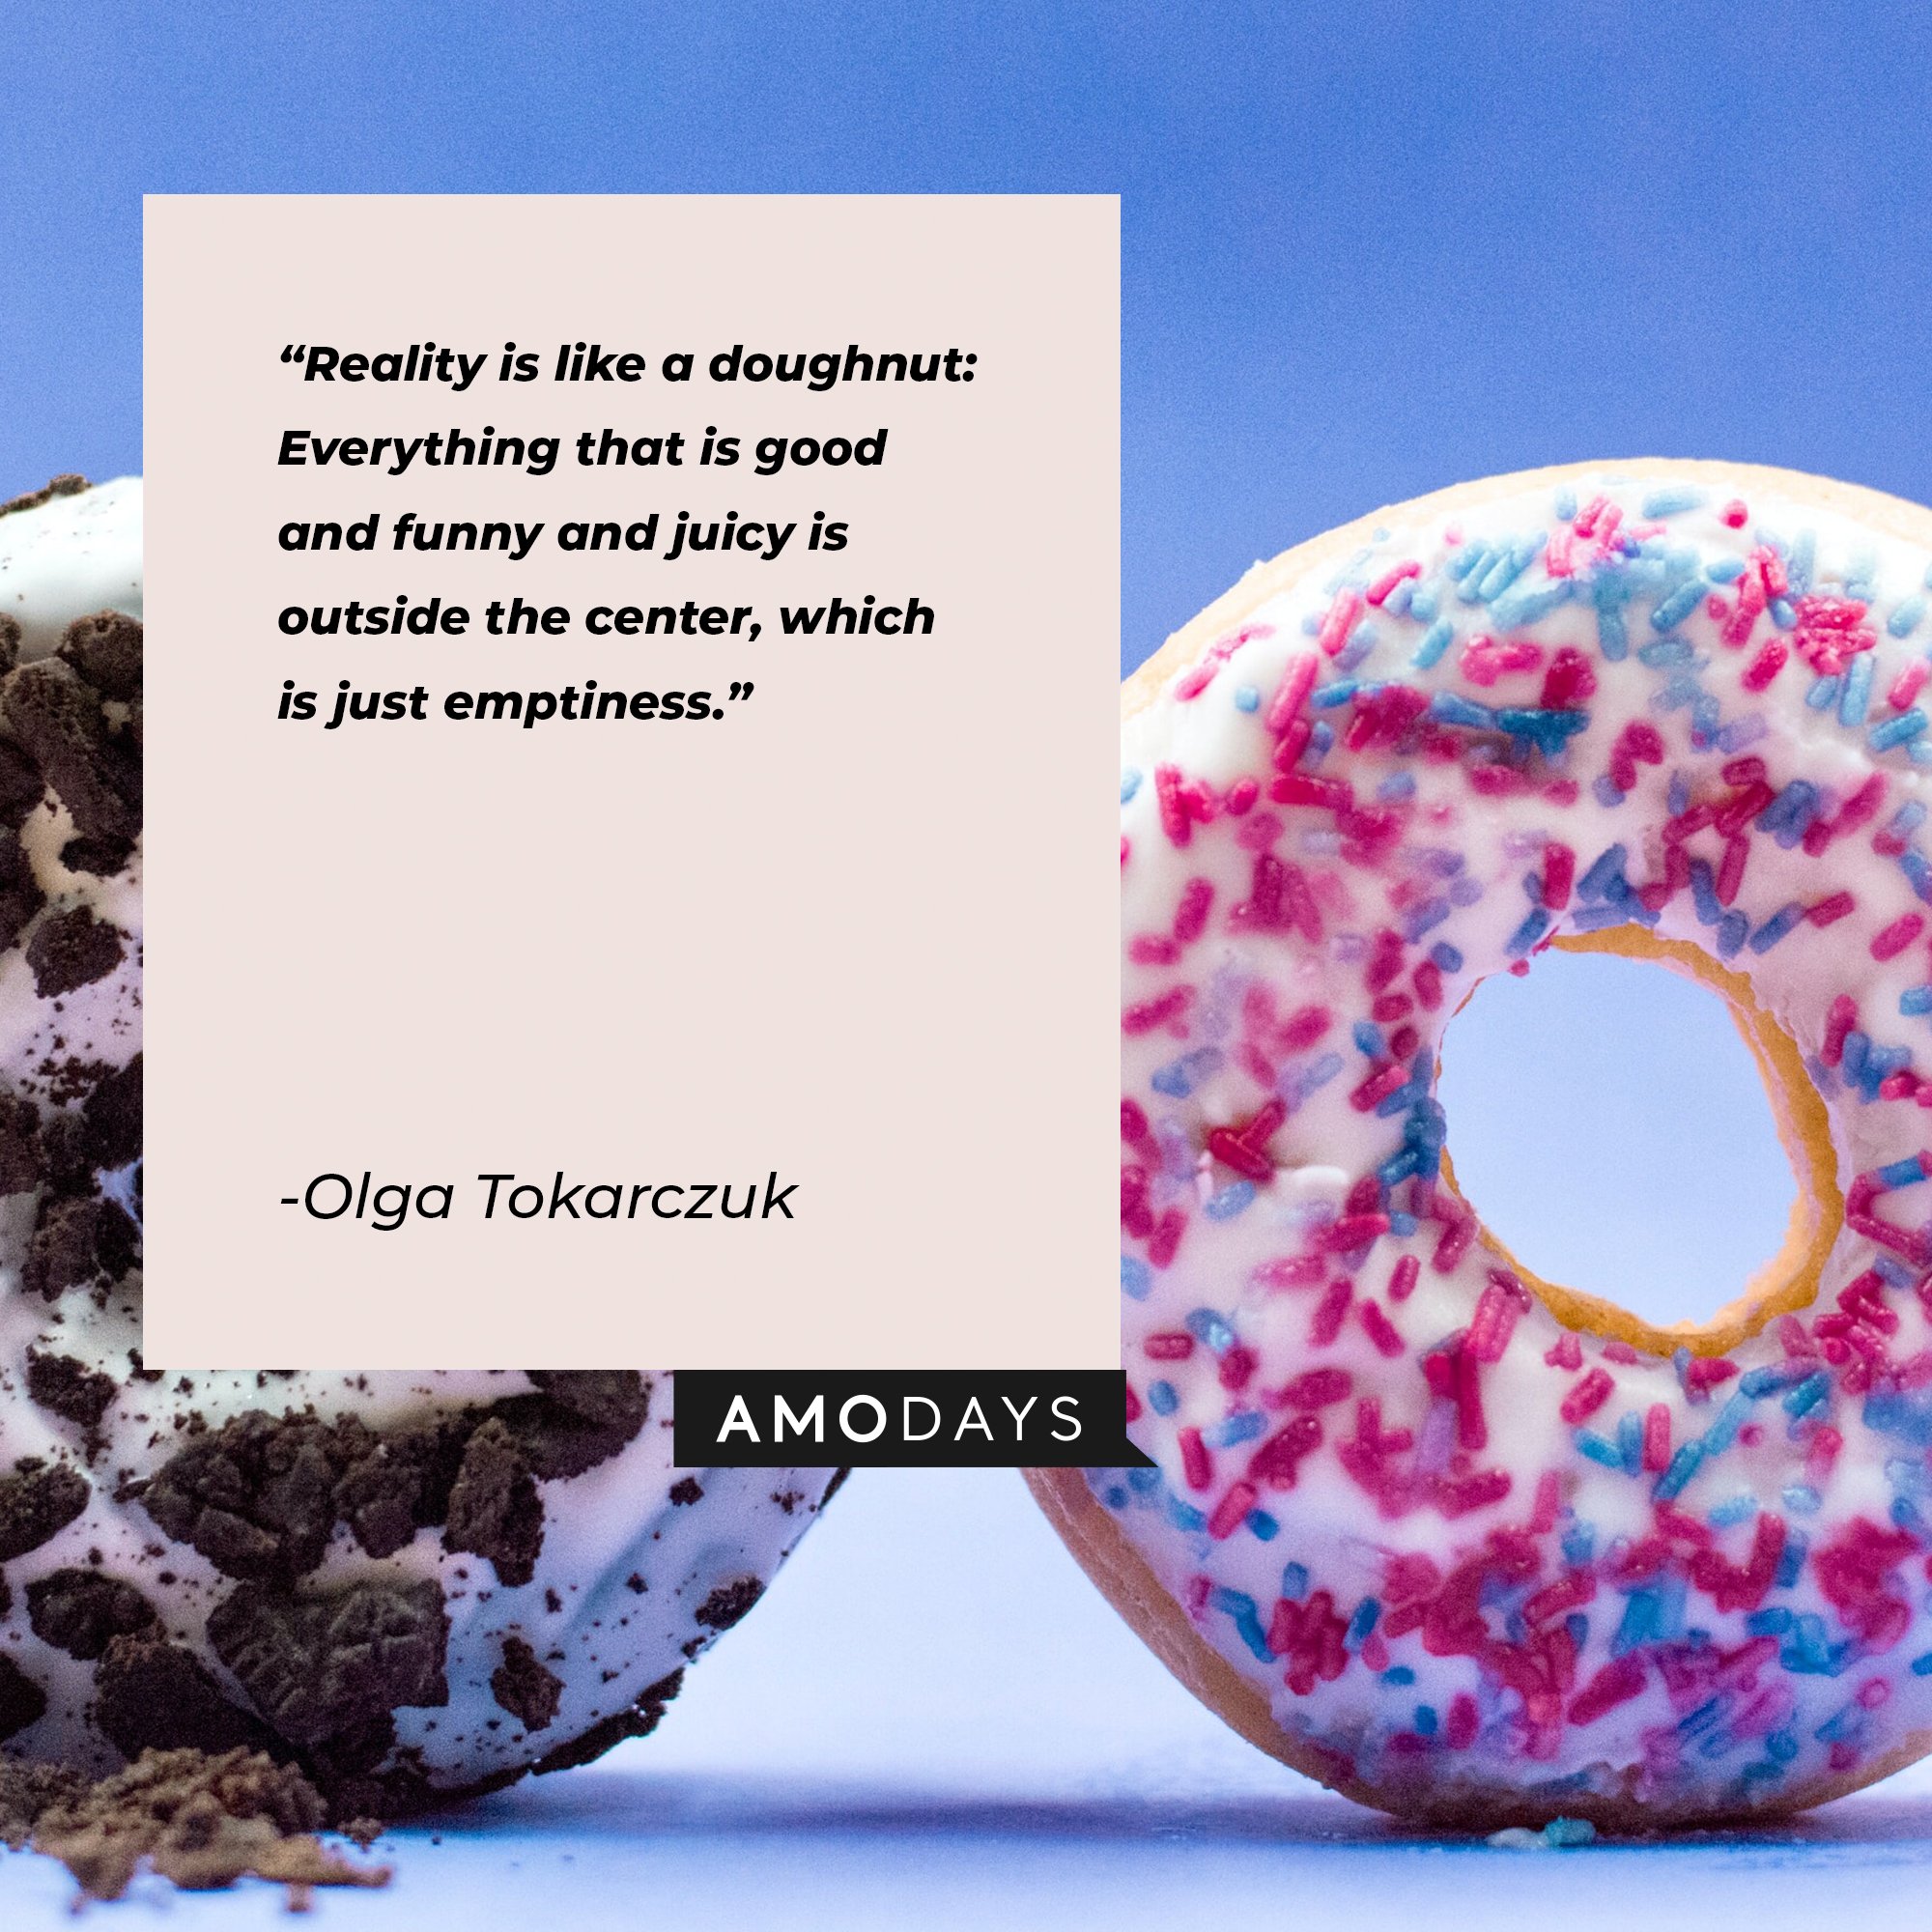 Olga Tokarczuk's quote: "Reality is like a doughnut: Everything that is good and funny and juicy is outside the center, which is just emptiness." | Image: AmoDays